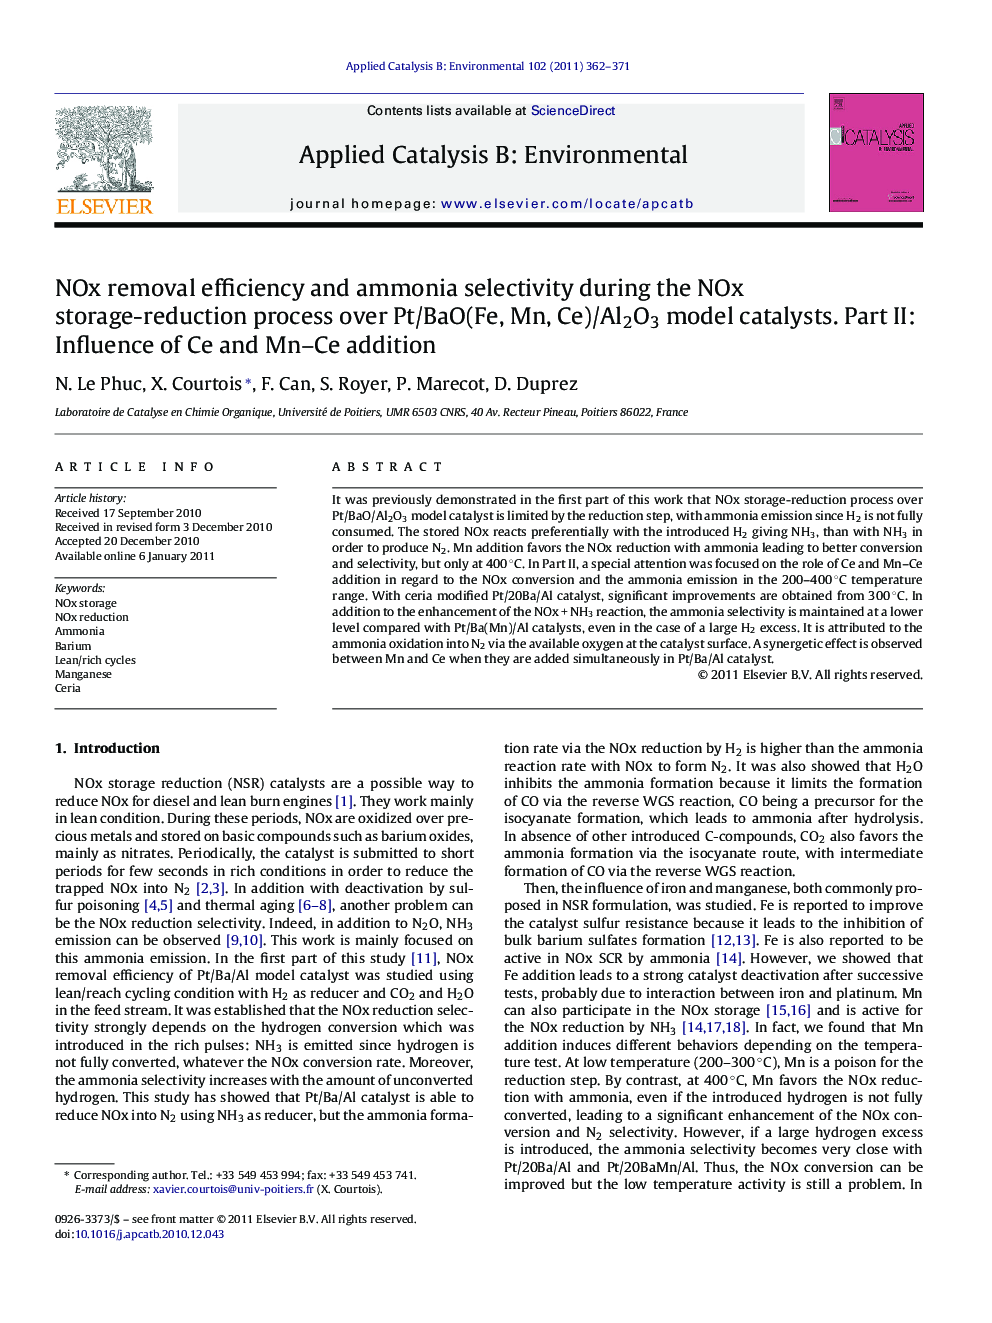 NOx removal efficiency and ammonia selectivity during the NOx storage-reduction process over Pt/BaO(Fe, Mn, Ce)/Al2O3 model catalysts. Part II: Influence of Ce and Mn–Ce addition